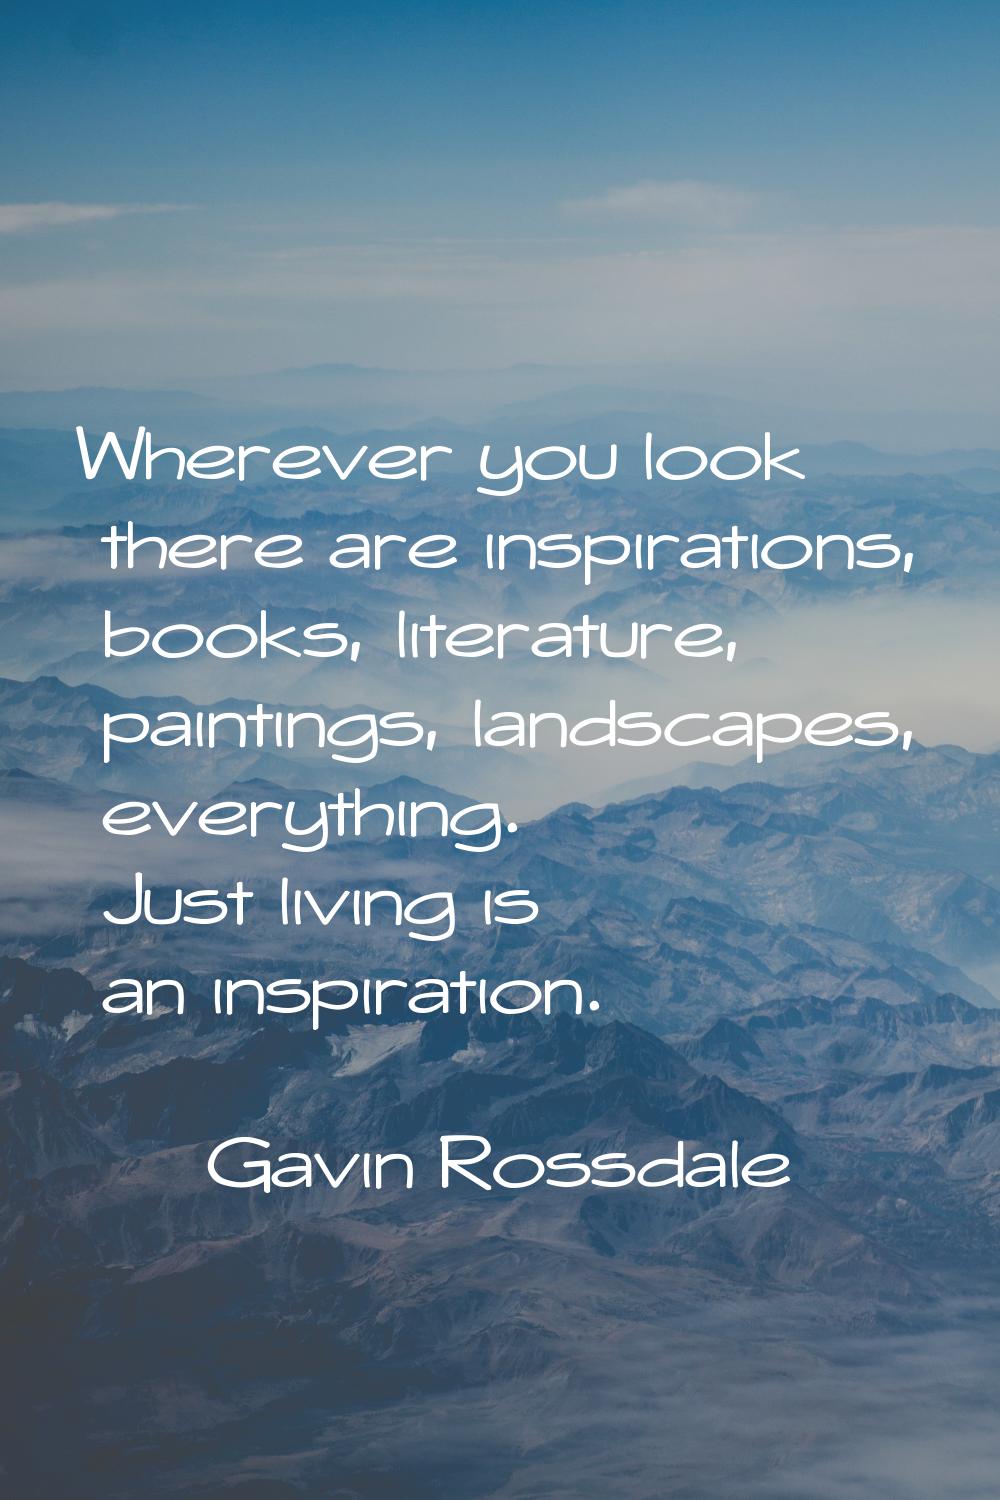 Wherever you look there are inspirations, books, literature, paintings, landscapes, everything. Jus